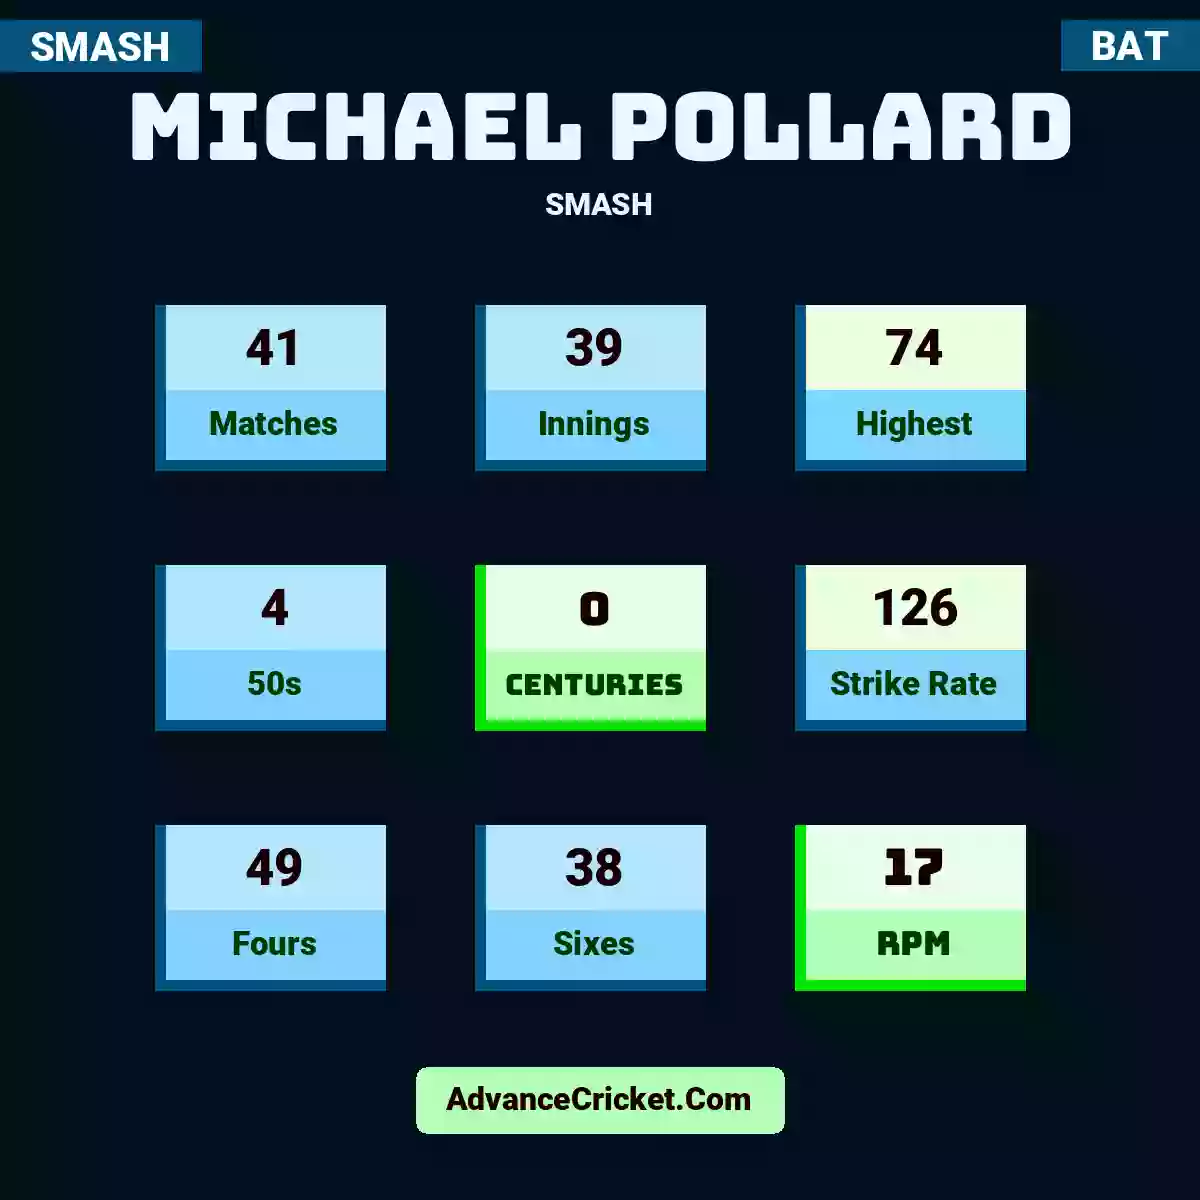 Michael Pollard SMASH , Michael Pollard played 41 matches, scored 74 runs as highest, 4 half-centuries, and 0 centuries, with a strike rate of 126. M.Pollard hit 49 fours and 38 sixes, with an RPM of 17.